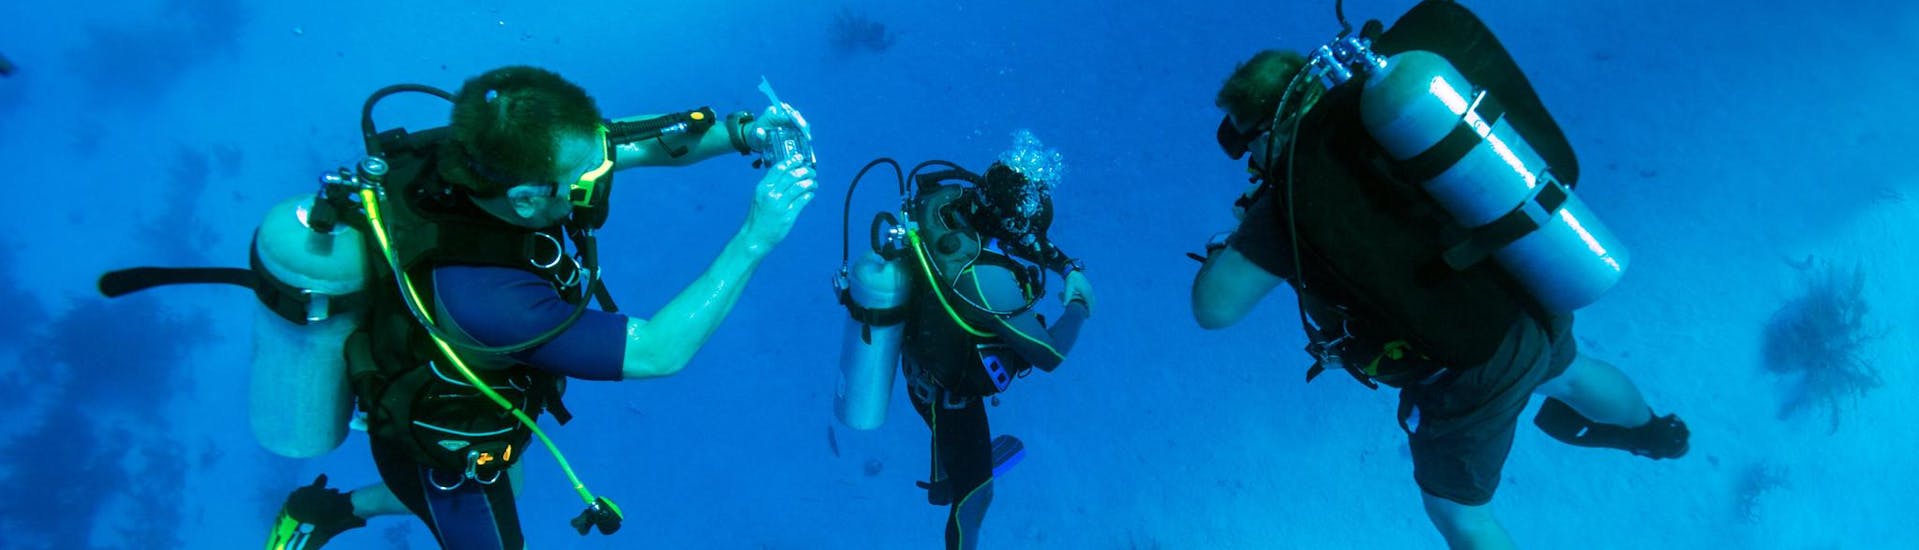 Two divers being guided by an experienced guide during an activity.